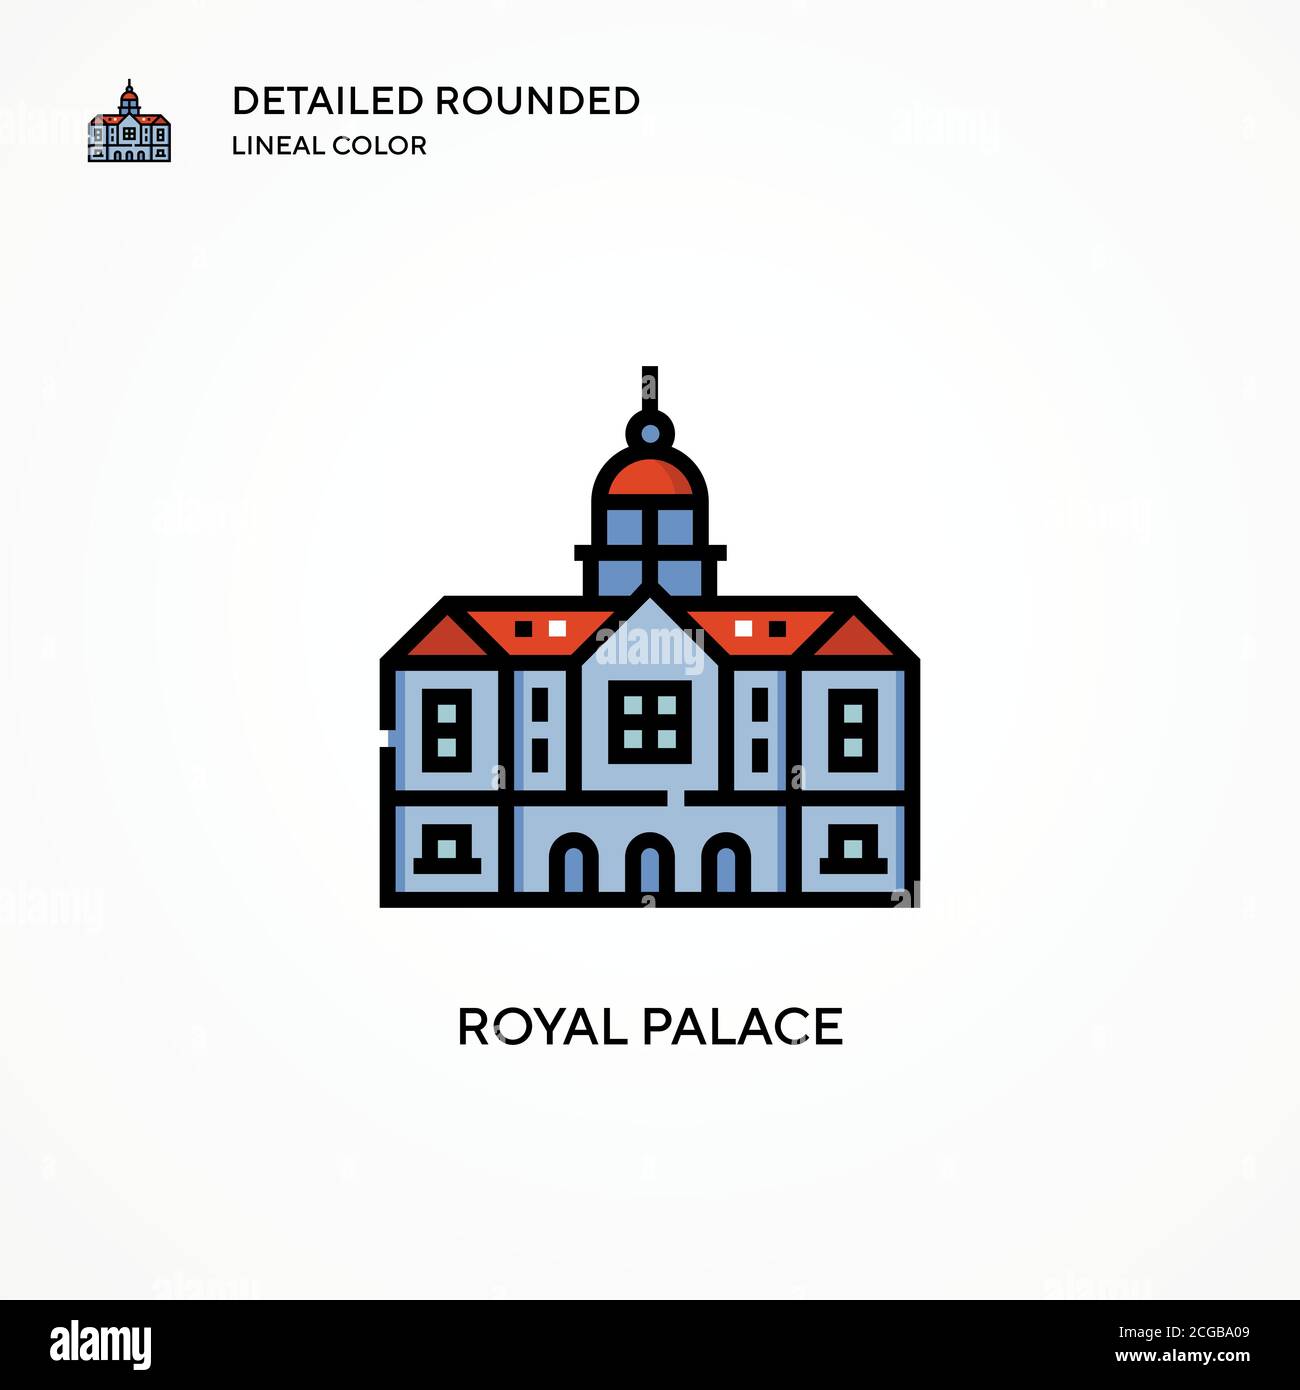 Royal palace vector icon. Modern vector illustration concepts. Easy to edit and customize. Stock Vector